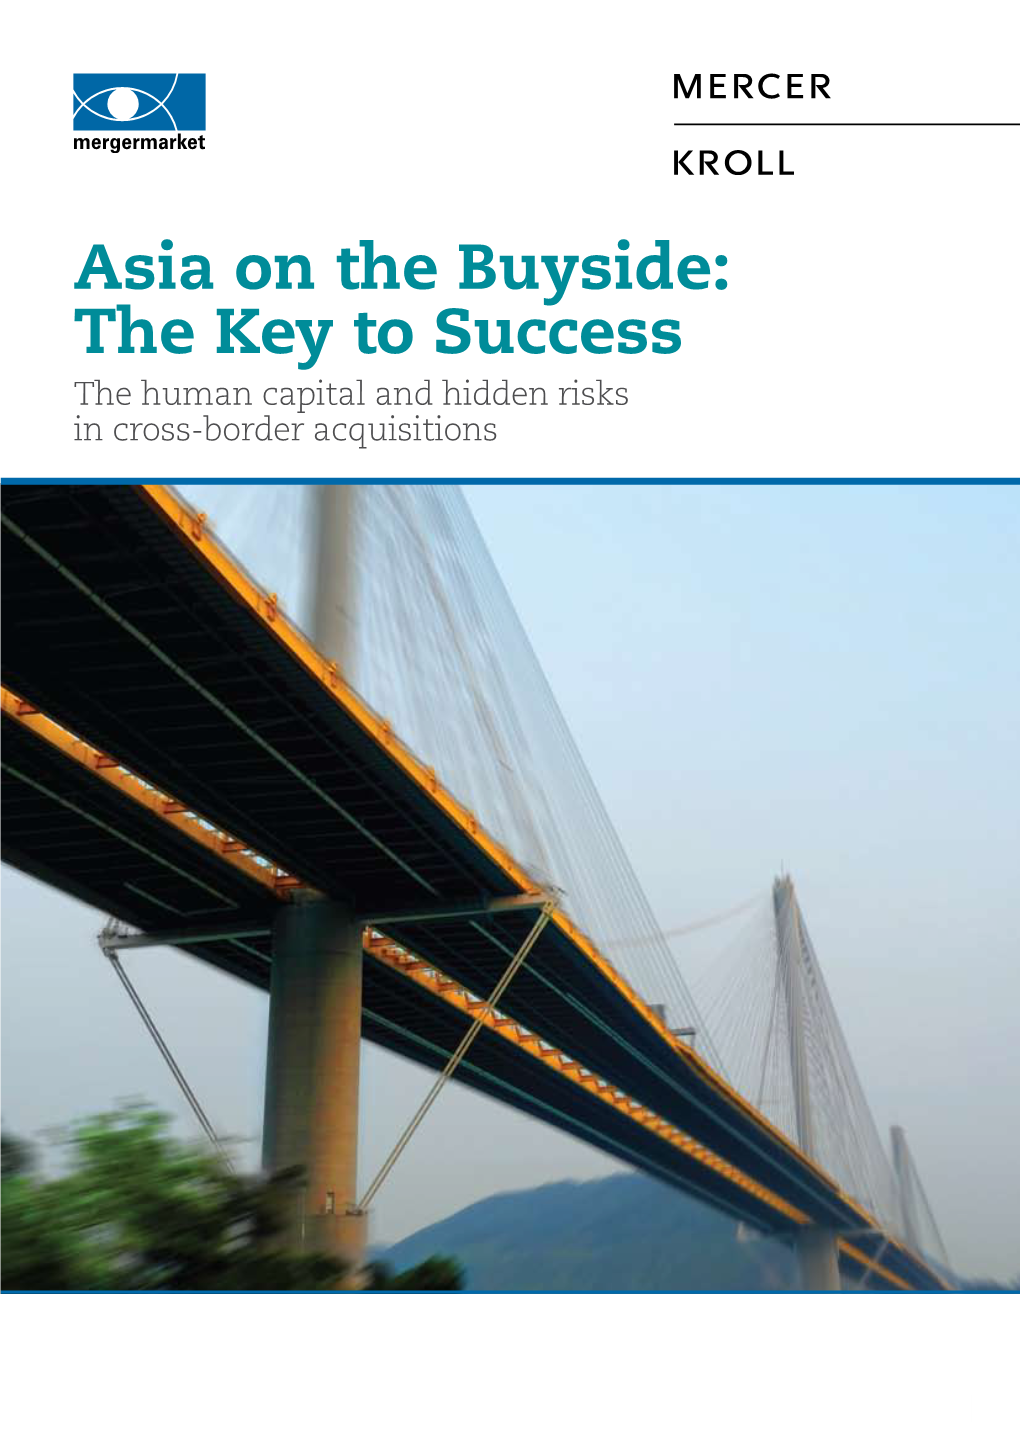 Asia on the Buyside: the Key to Success the Human Capital and Hidden Risks in Cross-Border Acquisitions